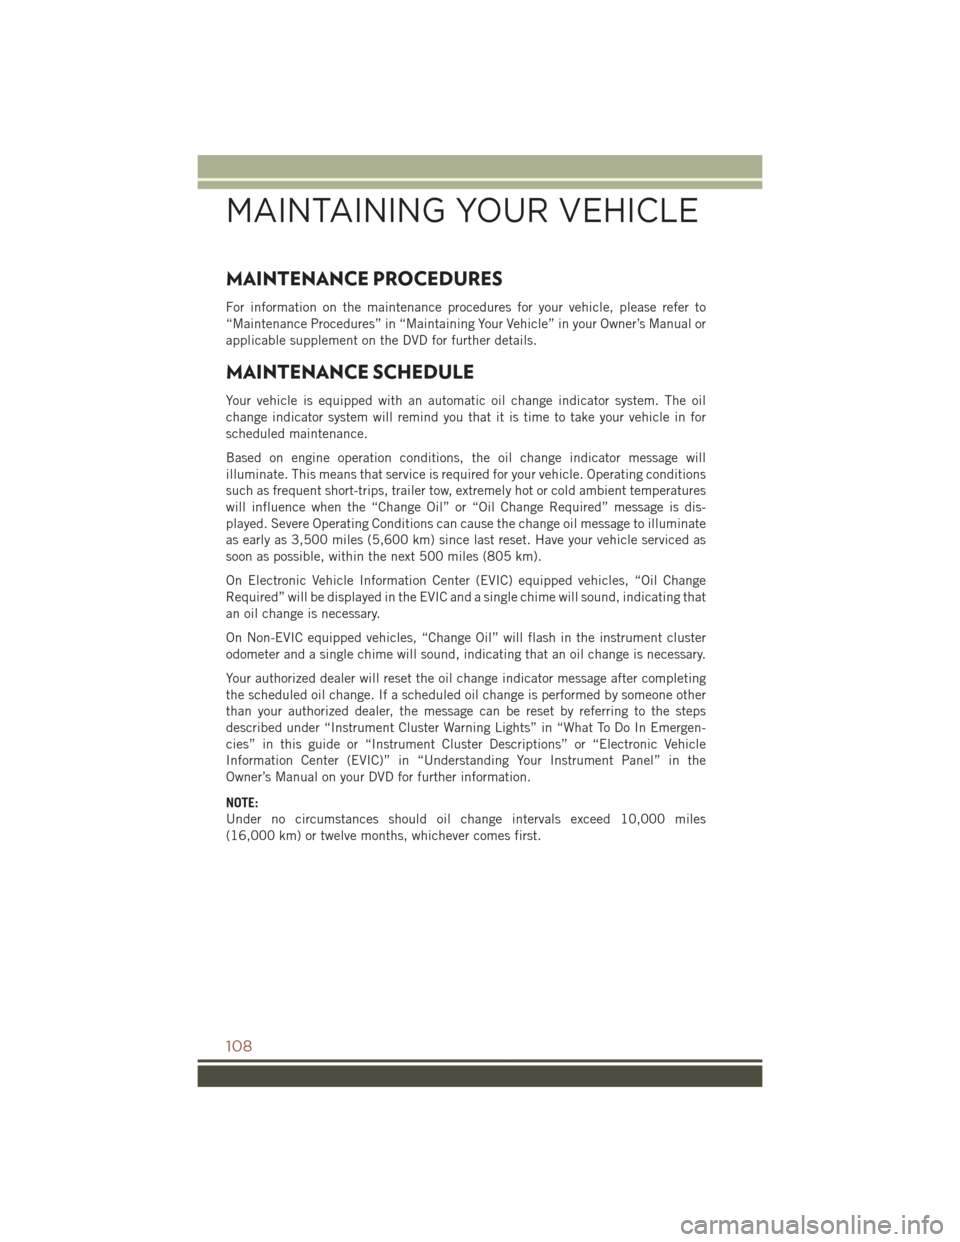 JEEP COMPASS 2015 1.G User Guide MAINTENANCE PROCEDURES
For information on the maintenance procedures for your vehicle, please refer to
“Maintenance Procedures” in “Maintaining Your Vehicle” in your Owner’s Manual or
applic